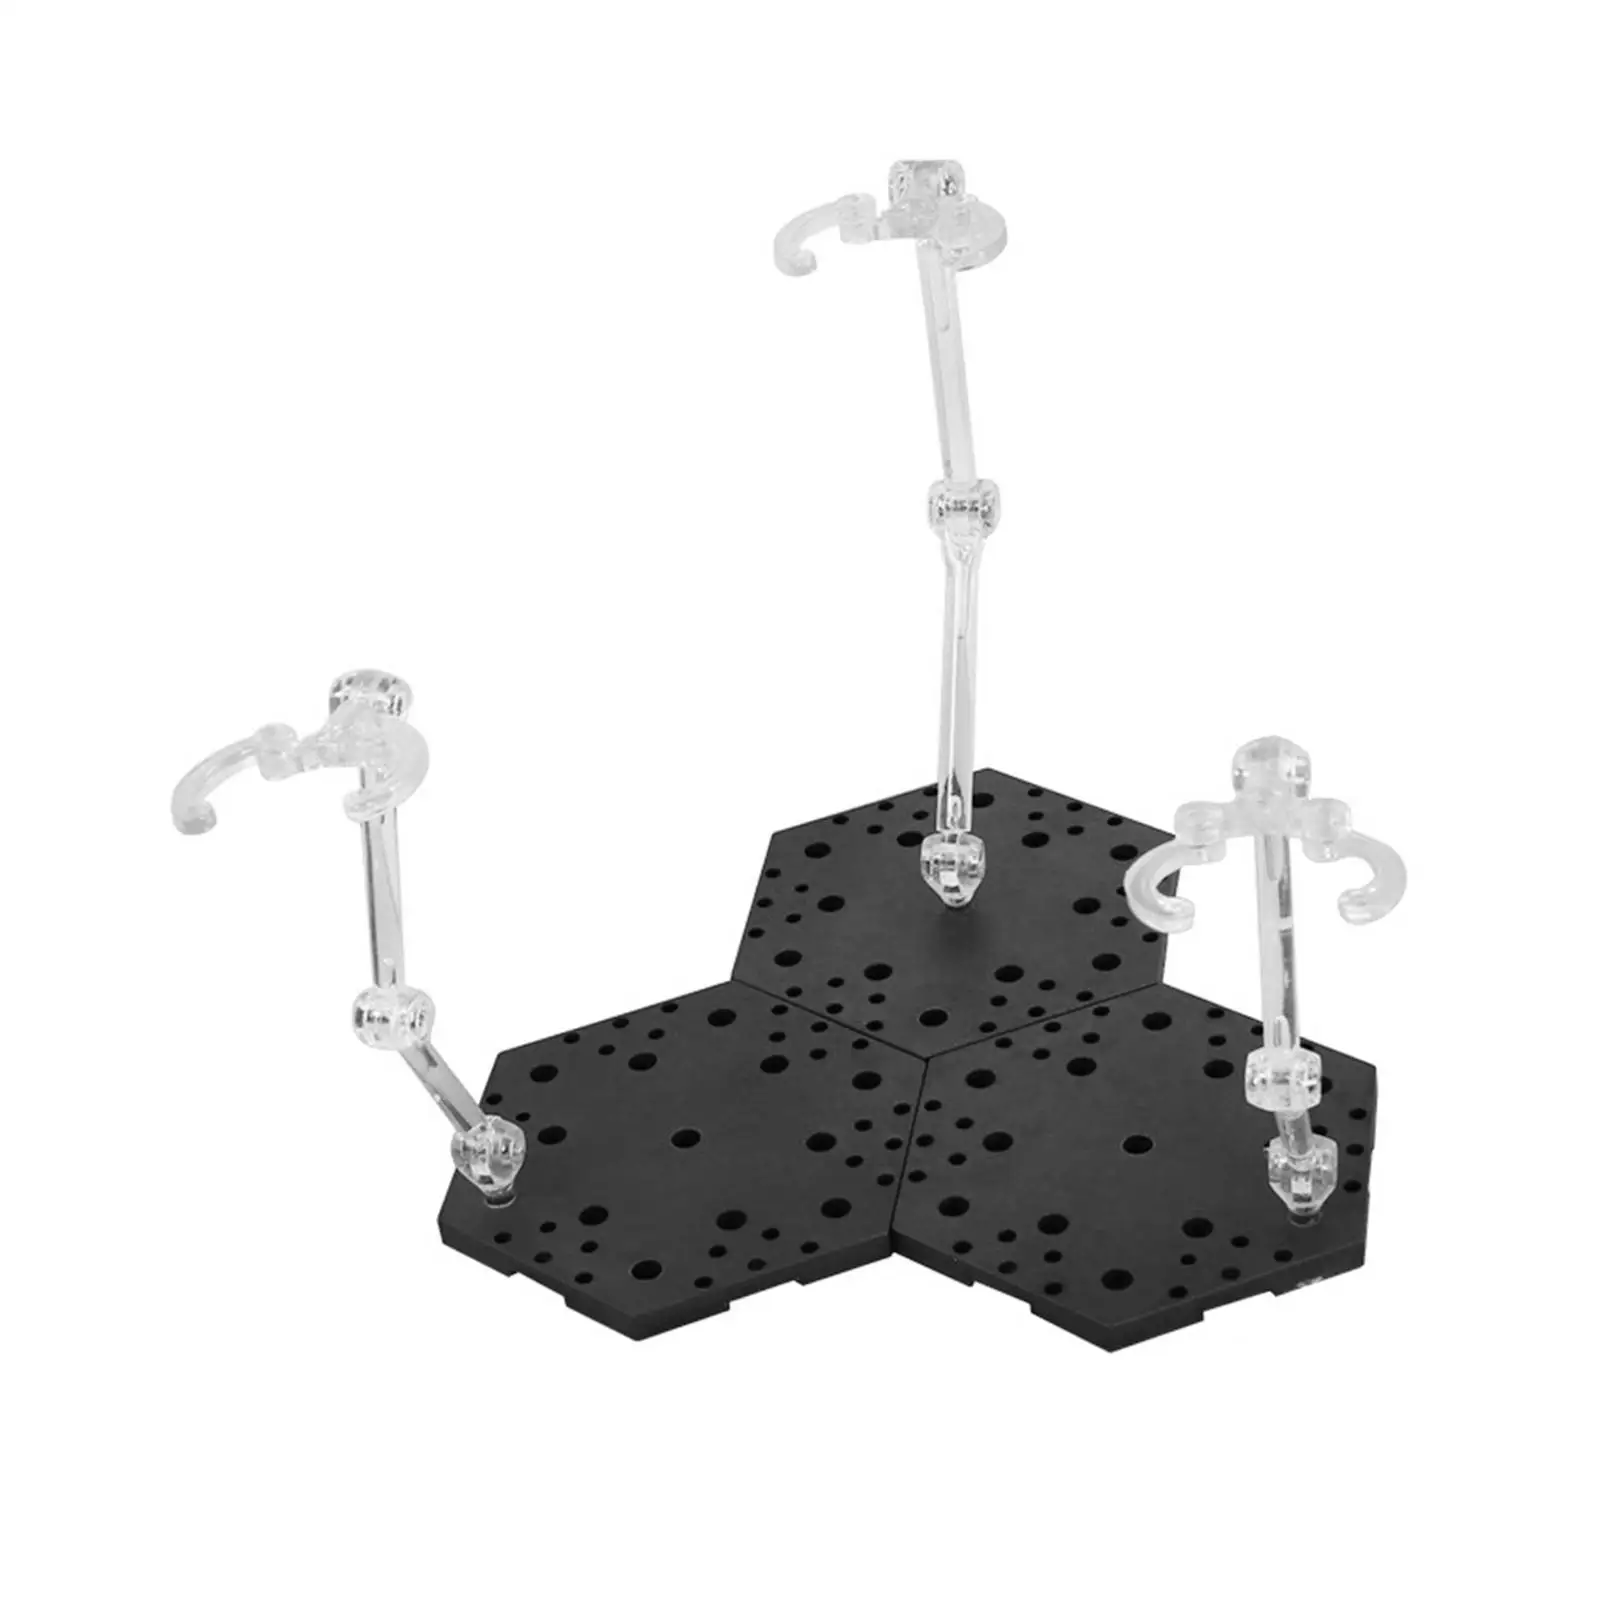 Sturdy Figure Display Base Bracket Rack Support Stand Holder for 1/144 Action Figures Toys DIY Accessories